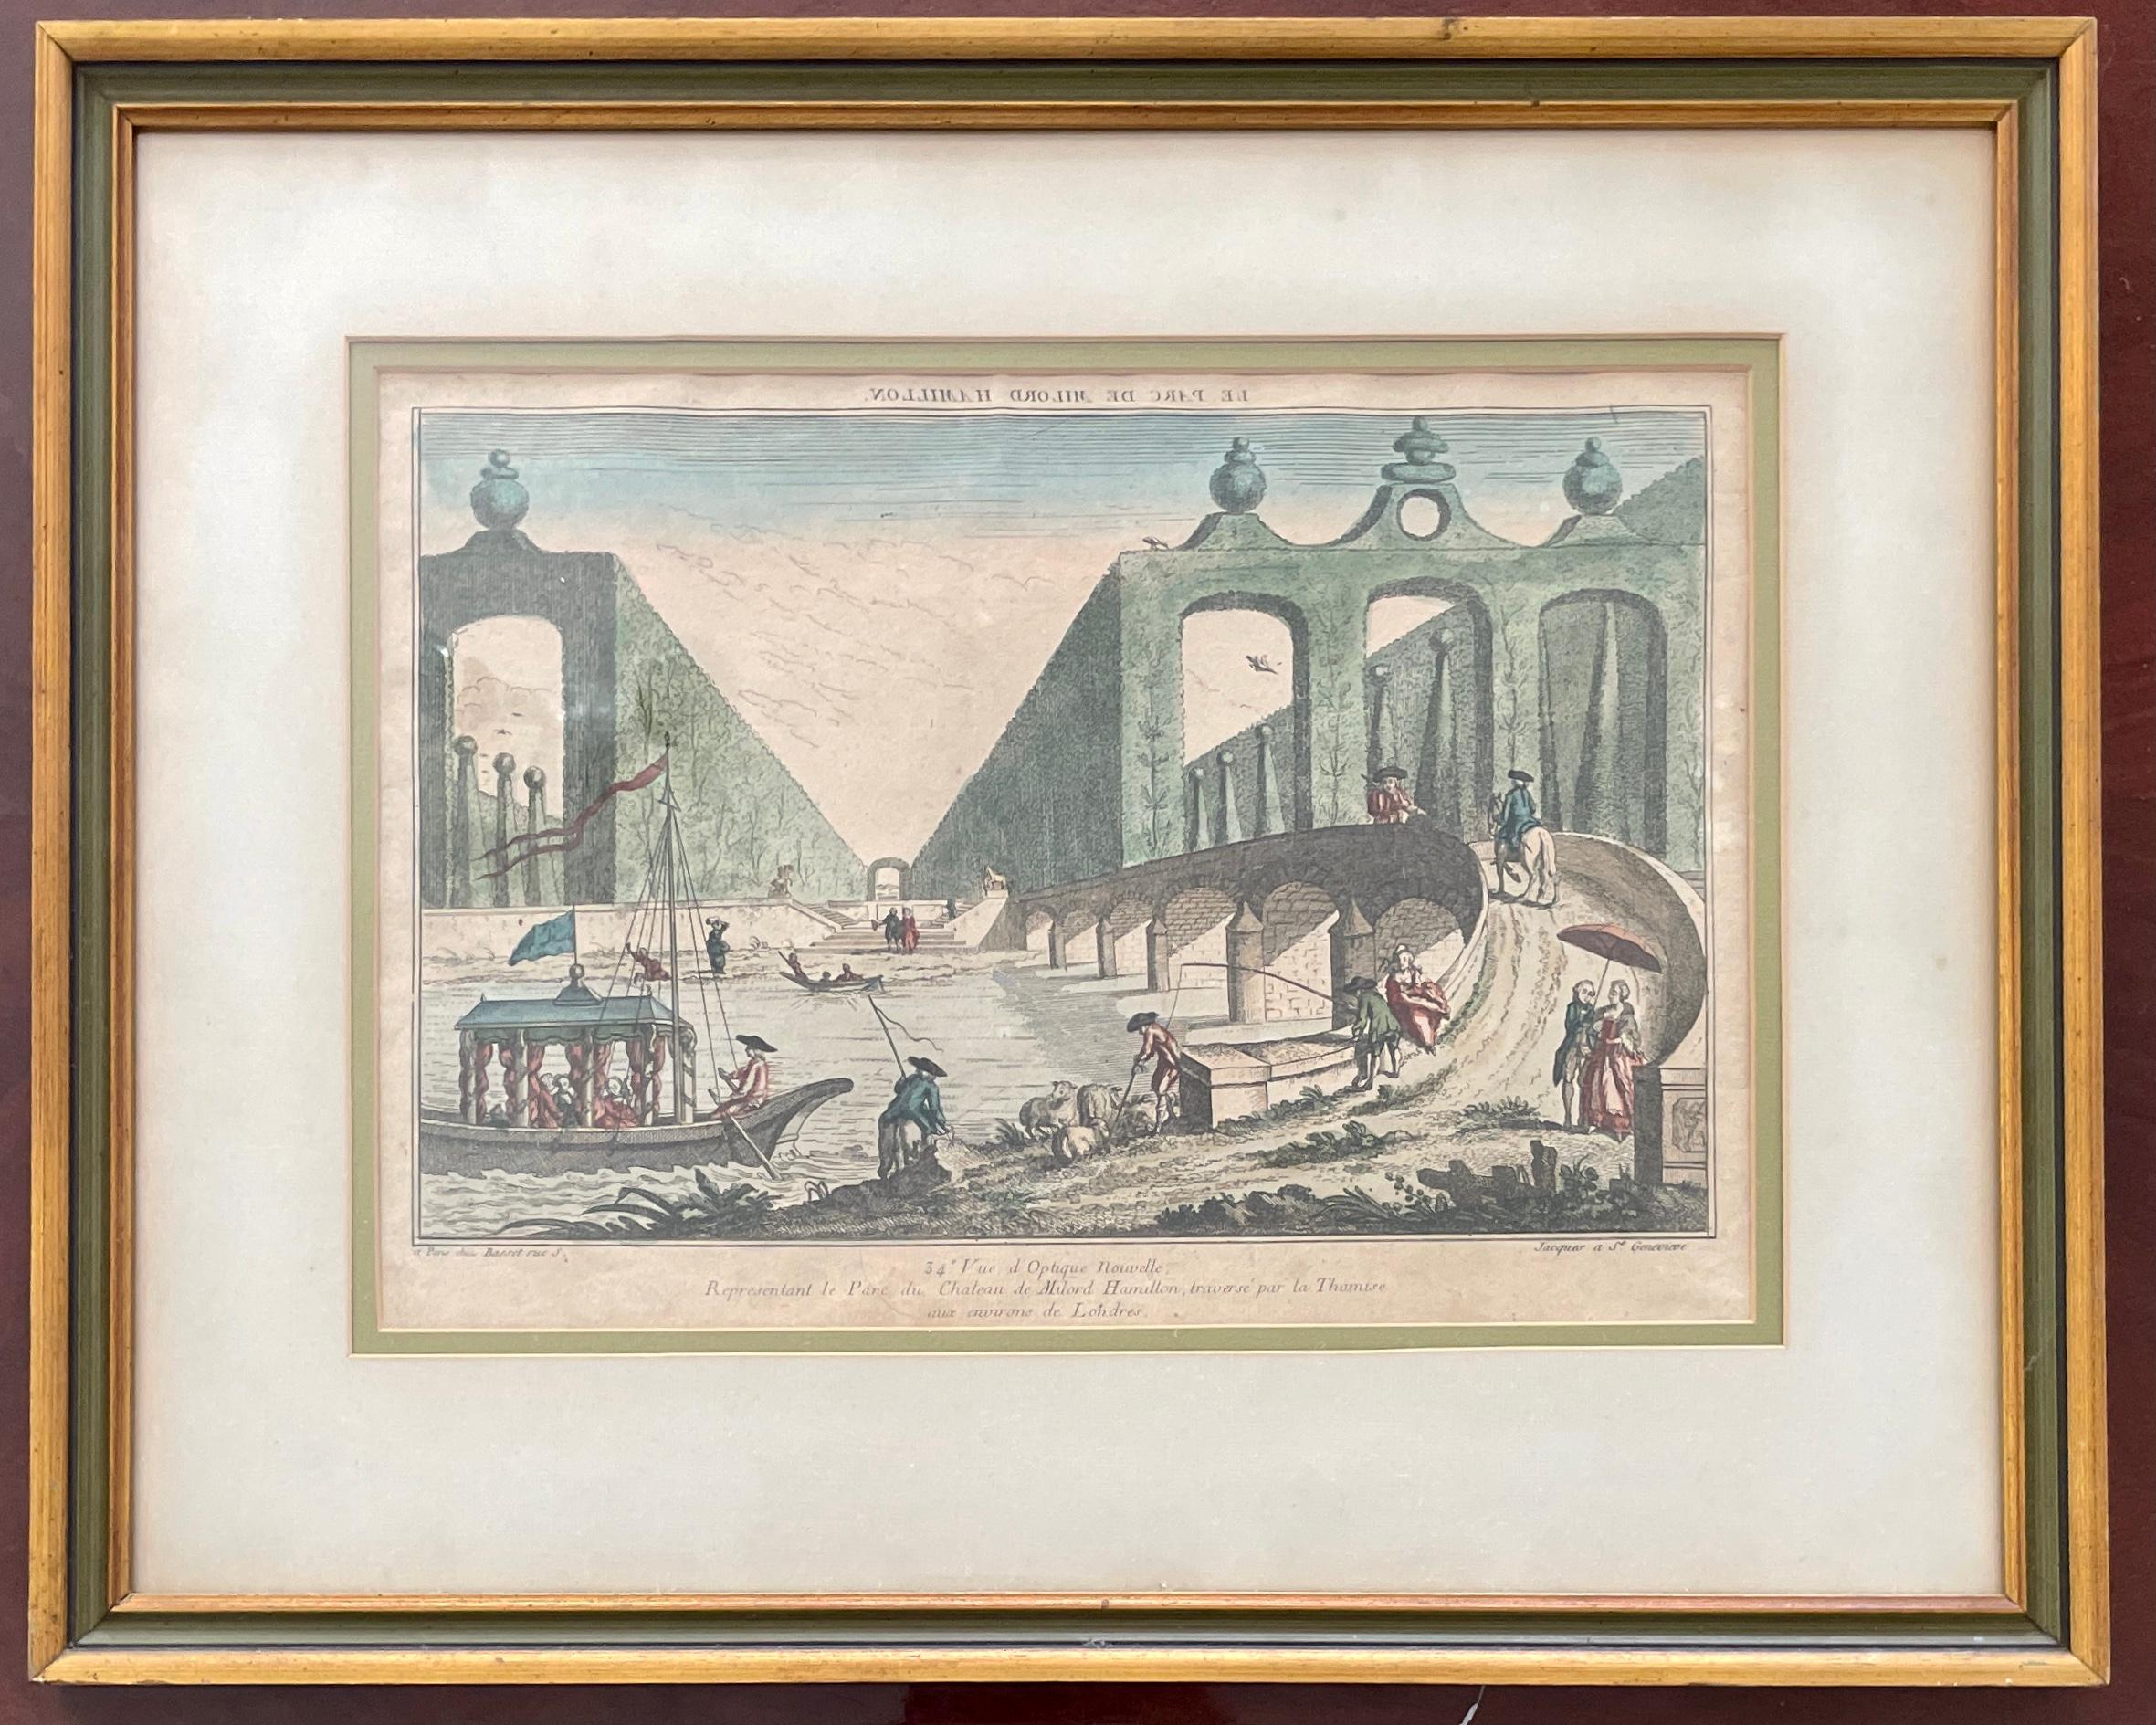 Classic French 18th century lithograph of a daily French life scene in a park. This item is in its original frame. Great addition to your Classic French inspired interiors.